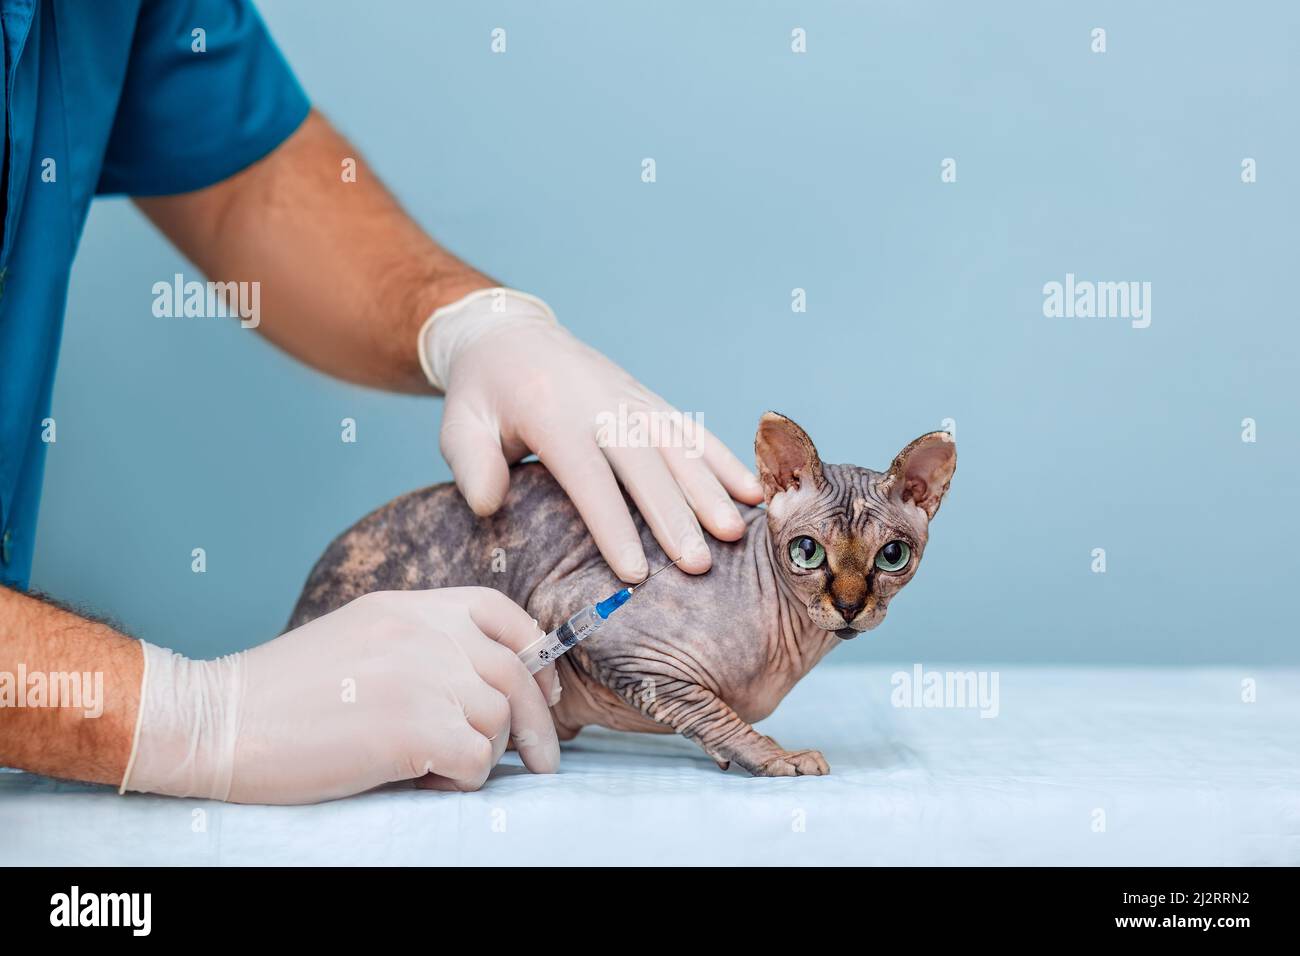 Veterinarian for cat vaccination in a veterinary clinic. Cropped image of a man holding a Sphinx cat  Stock Photo